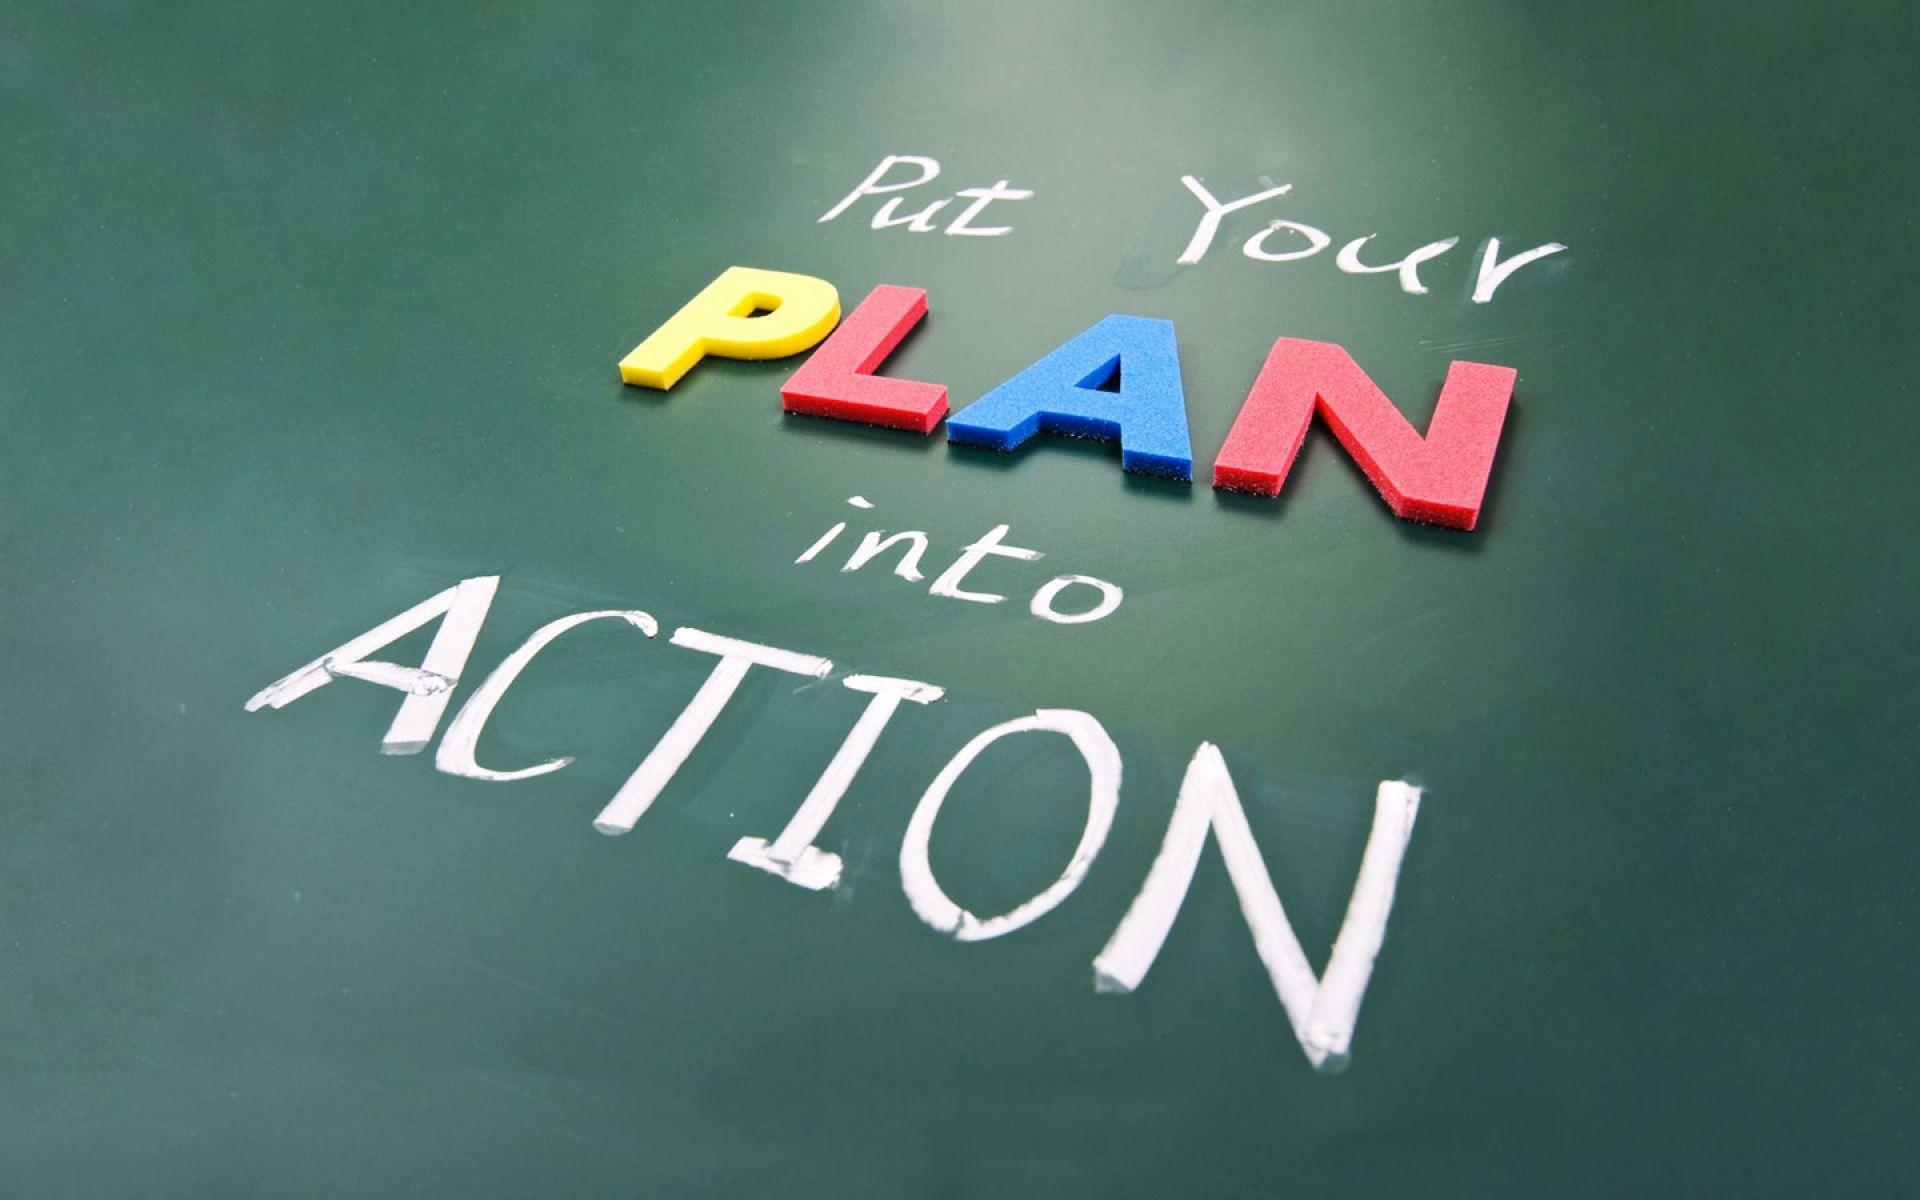 Put Your Plan Into Action. HD Motivation Wallpaper for Mobile